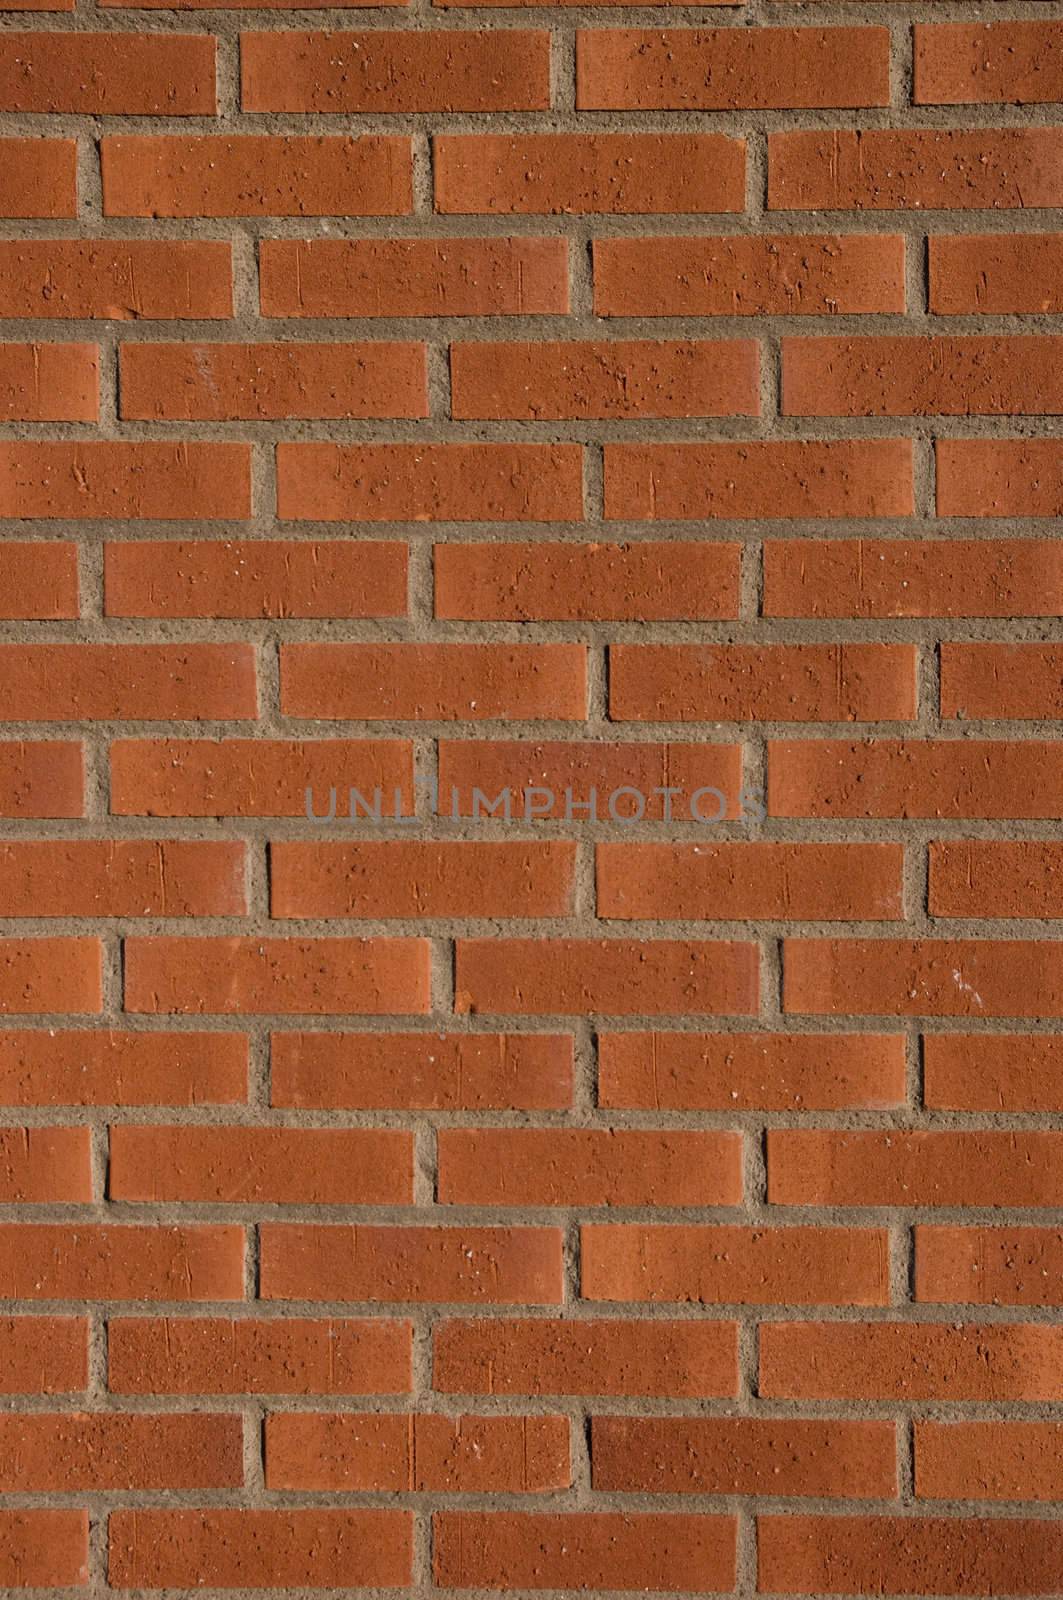 A plain brick wall, tile after tile, looks real solid.